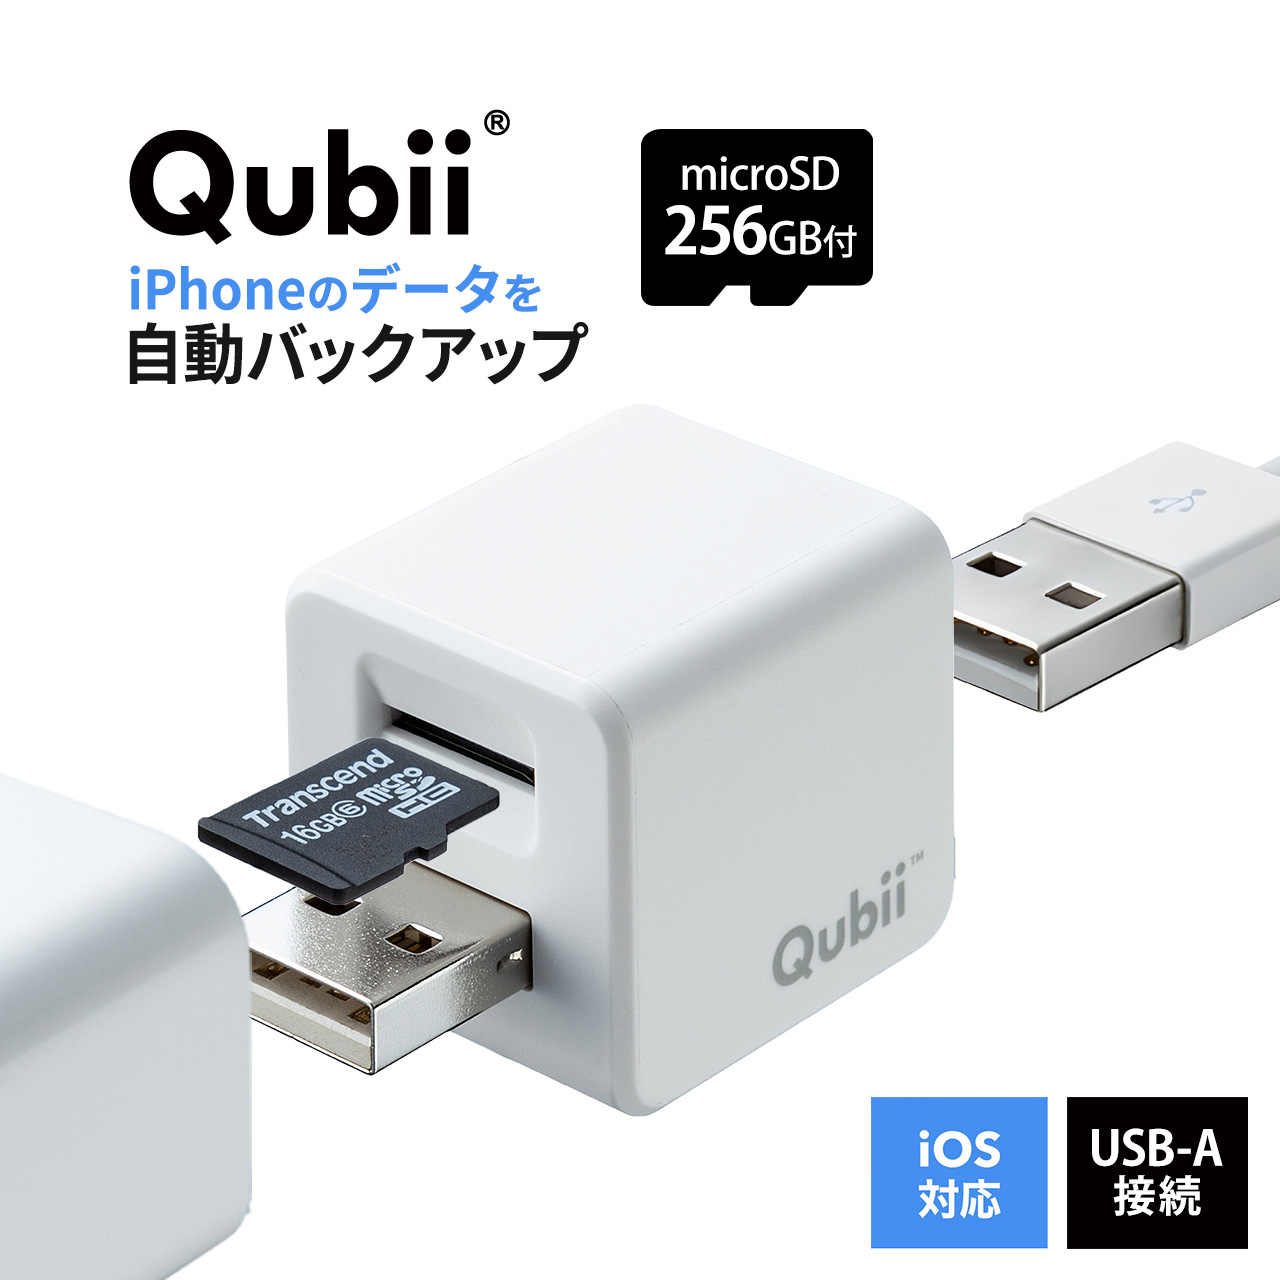 WorldPlus Apple MacBook Pro 17インチ Early Late 2011 バッテリー A1383 A129 -  ノートパソコンアクセサリ